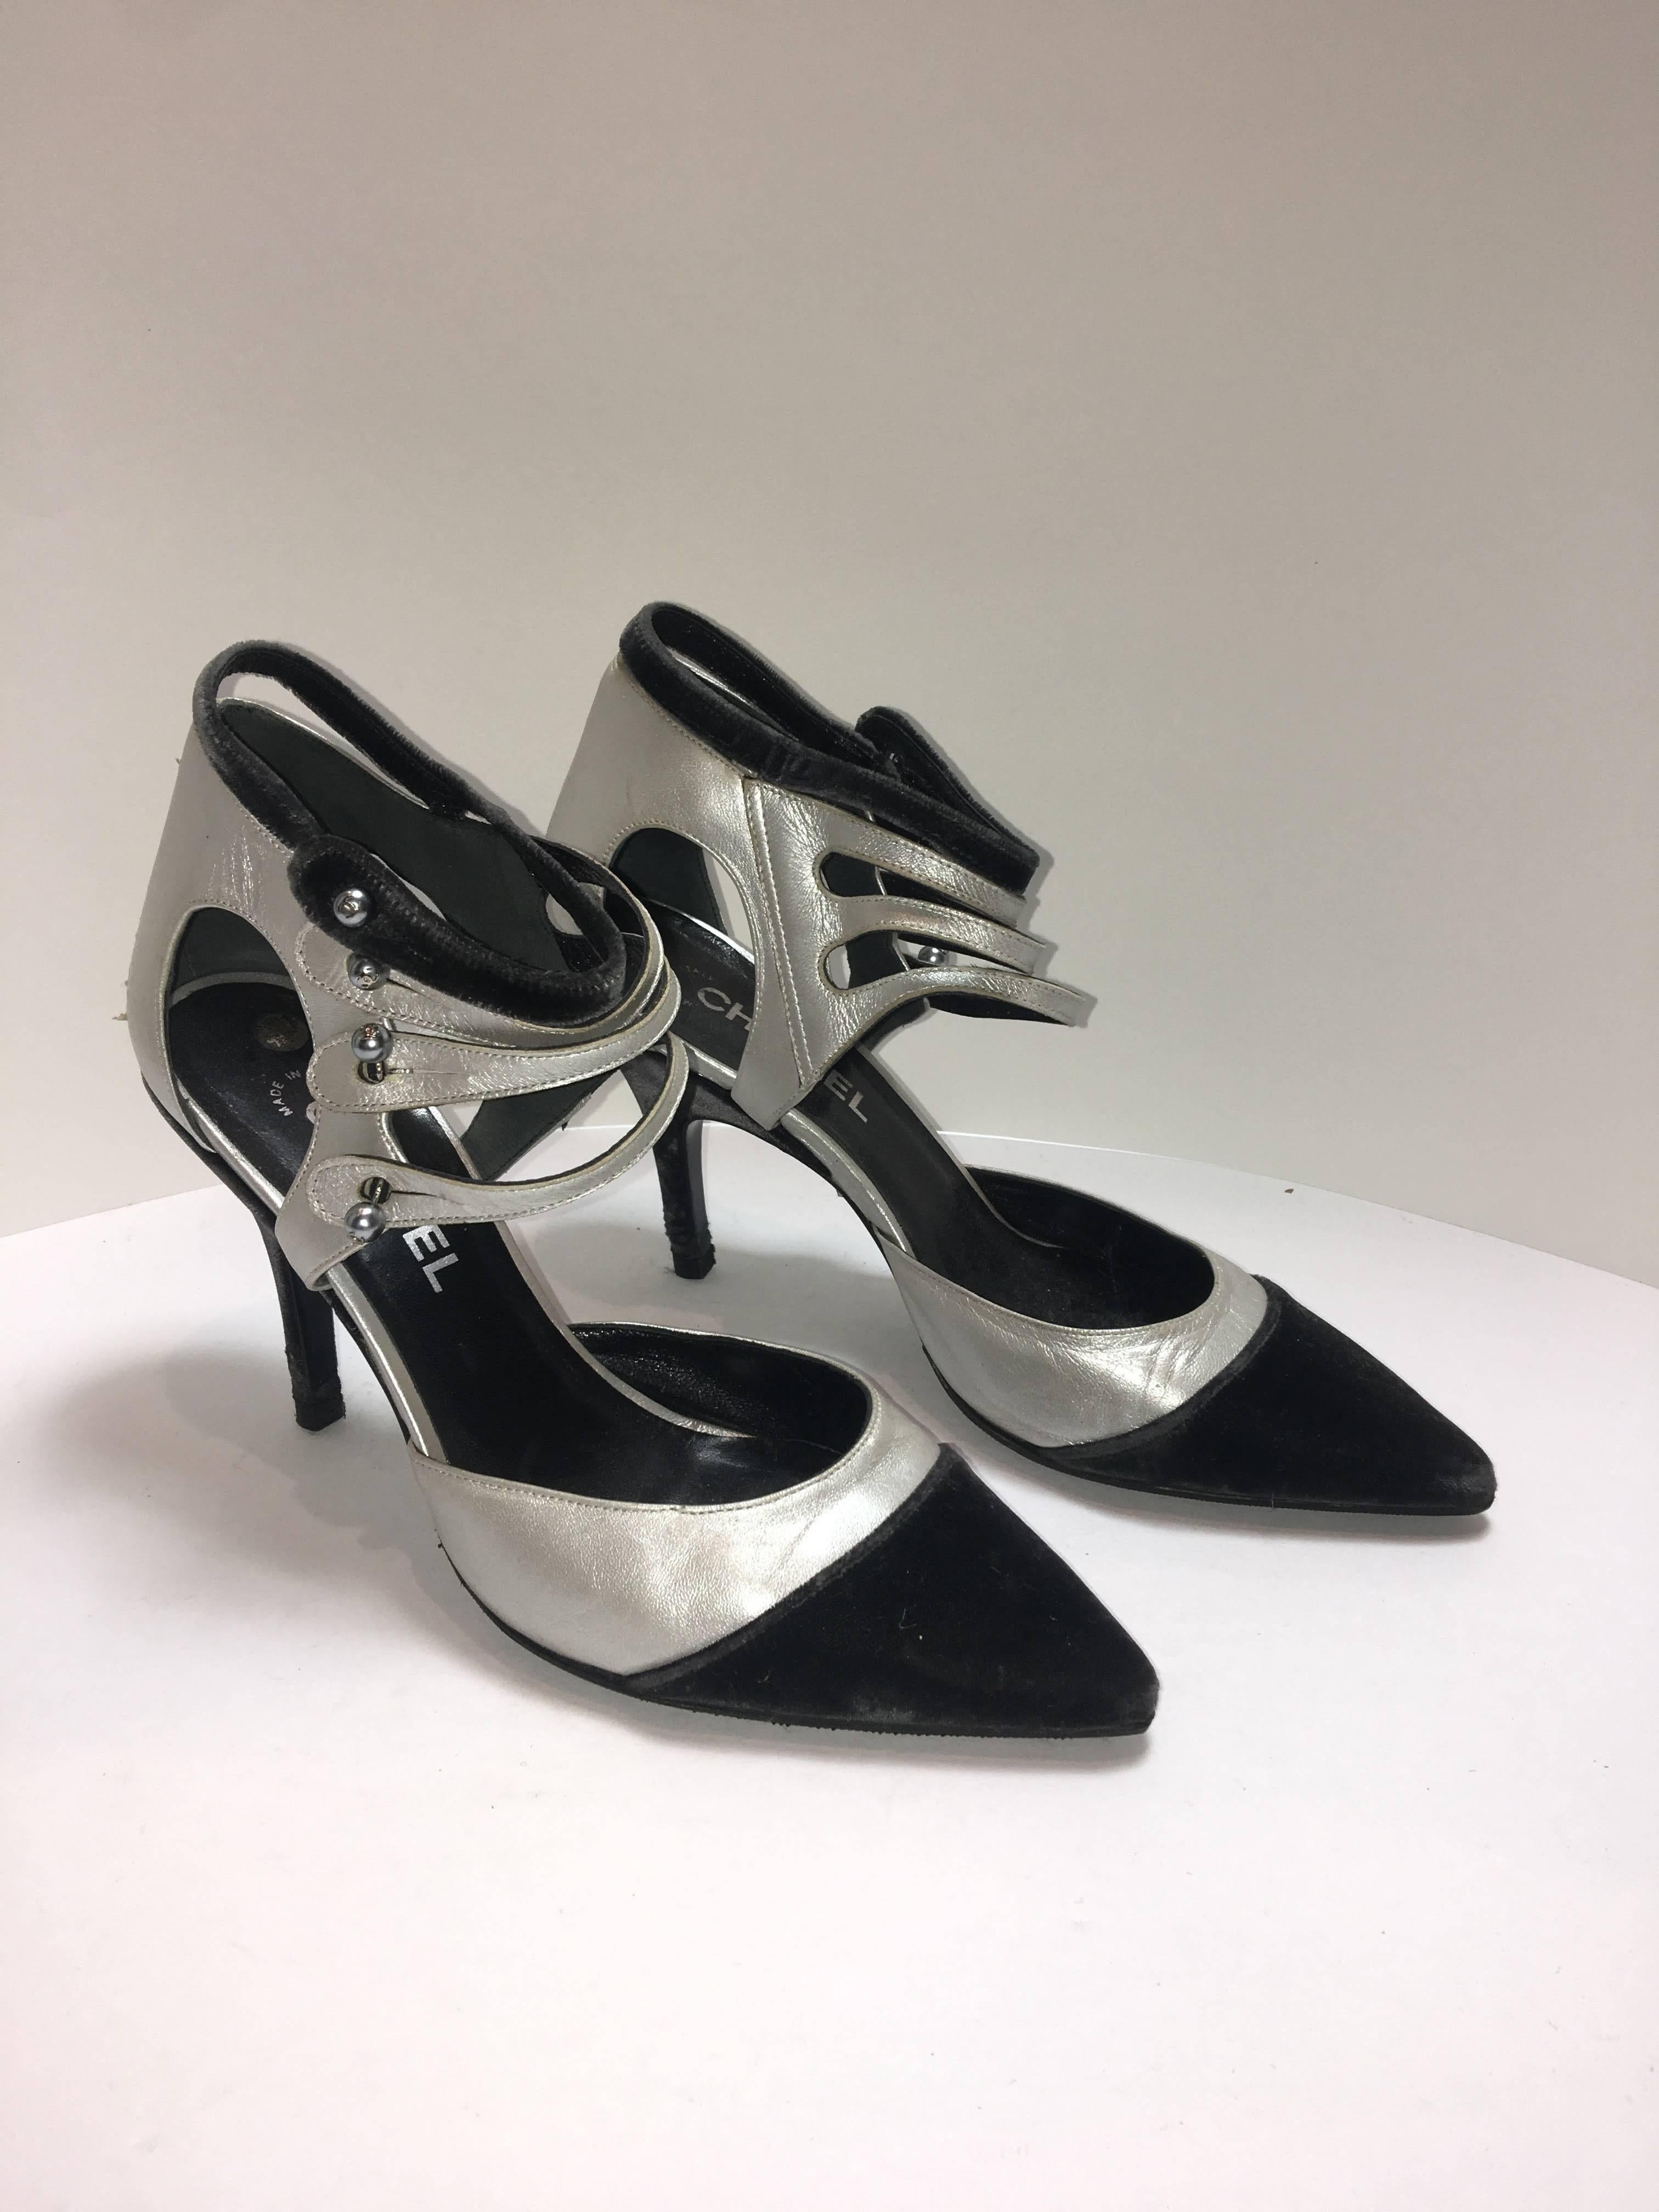 Chanel Black Velvet and Silver Leather Heels. Multi Ankle Straps with a Pointed toe. 